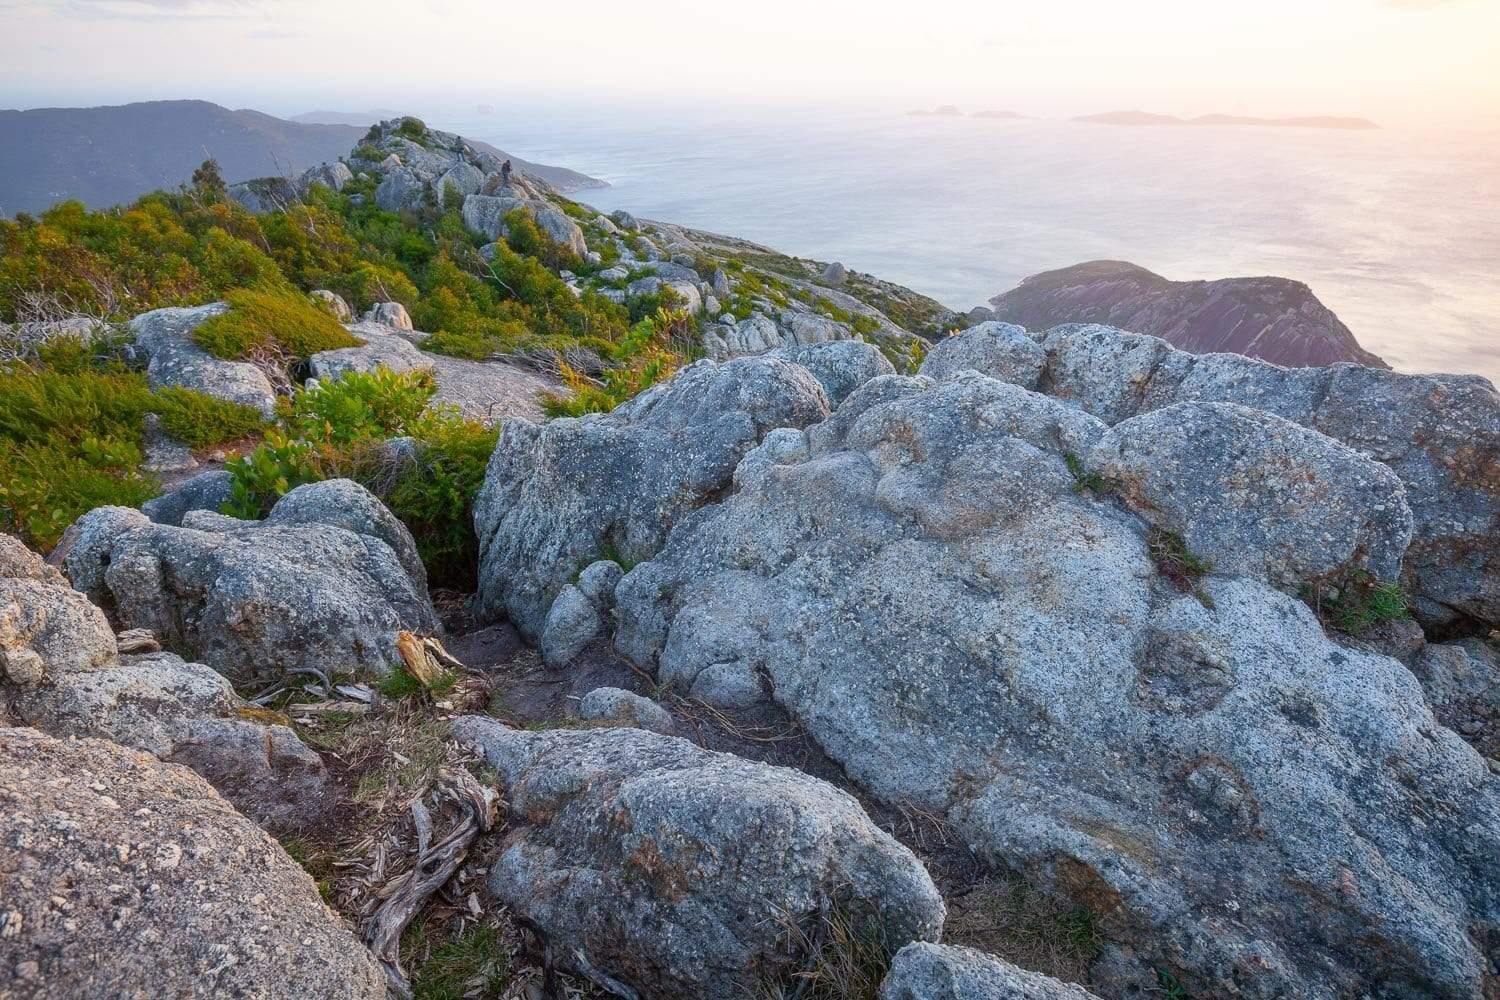 A hill area with mountain rocks and some greenery over, Oberon Sunset - Wilson's Promontory VIC